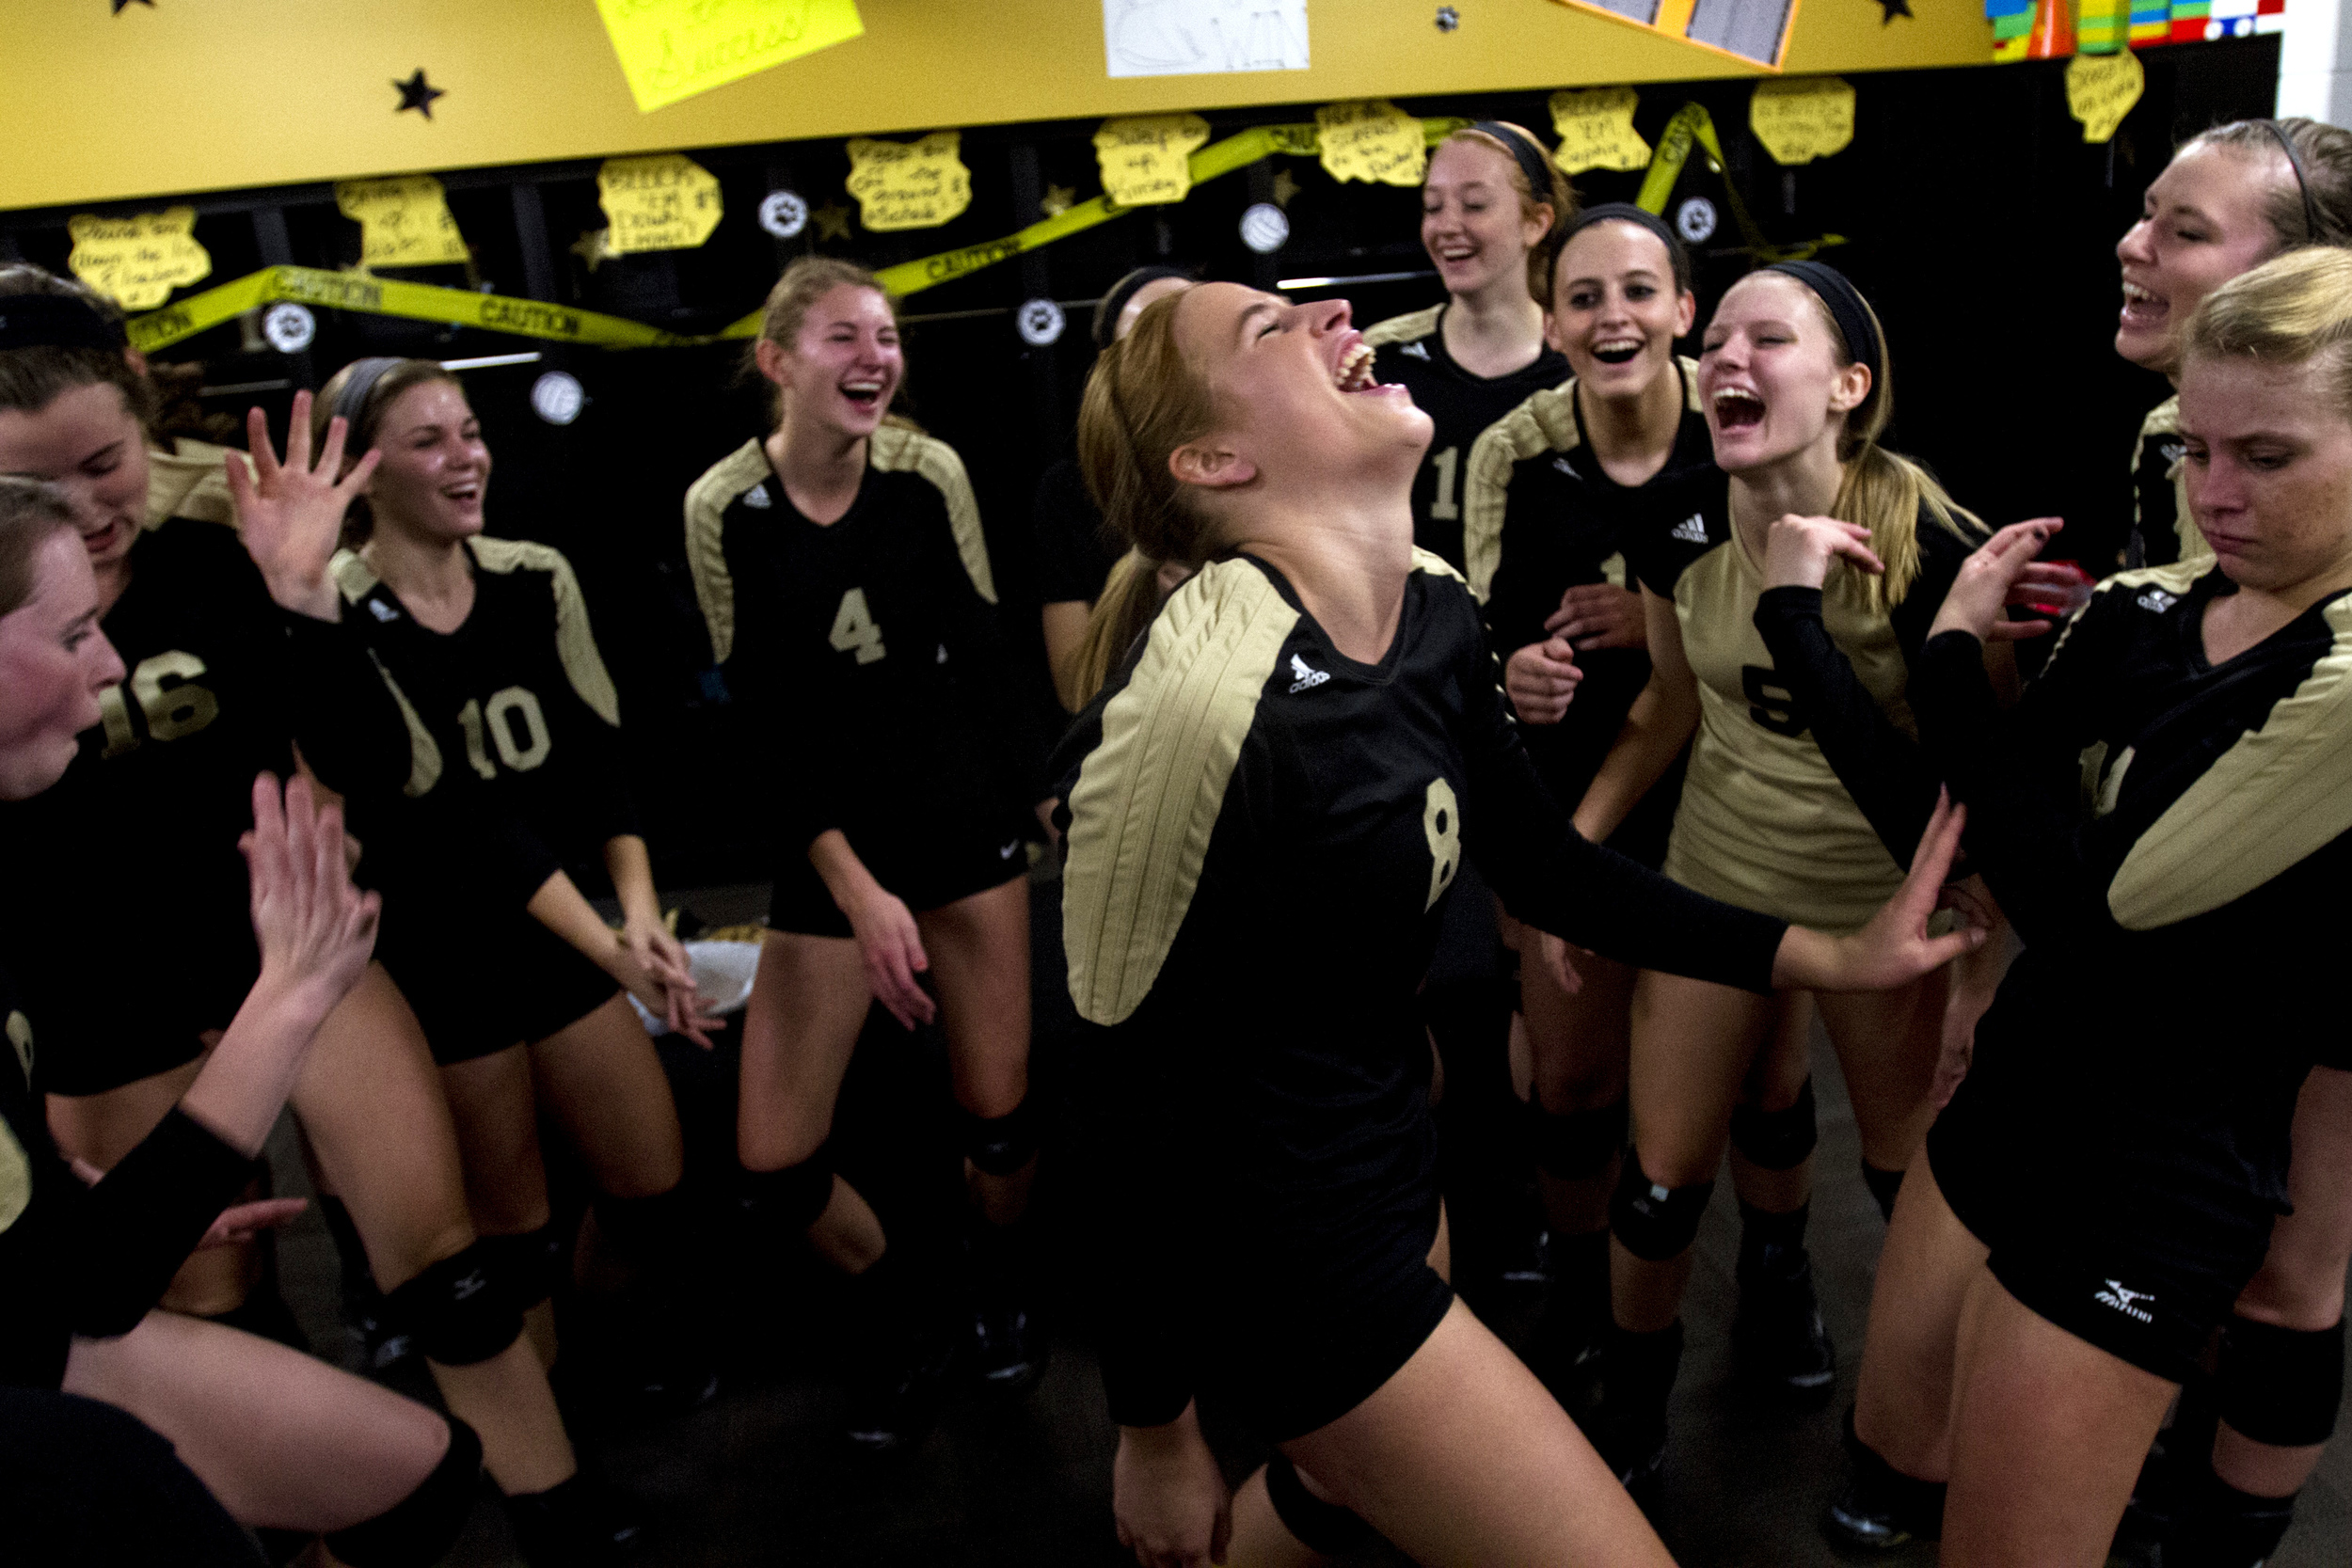  Jasper's Tori Sermersheim dances with her teammates in the locker room before the Class 3A girls volleyball sectional against Washington in Jasper, Ind. on Oct. 24, 2013. &nbsp;The Wildcats won in three sets. 